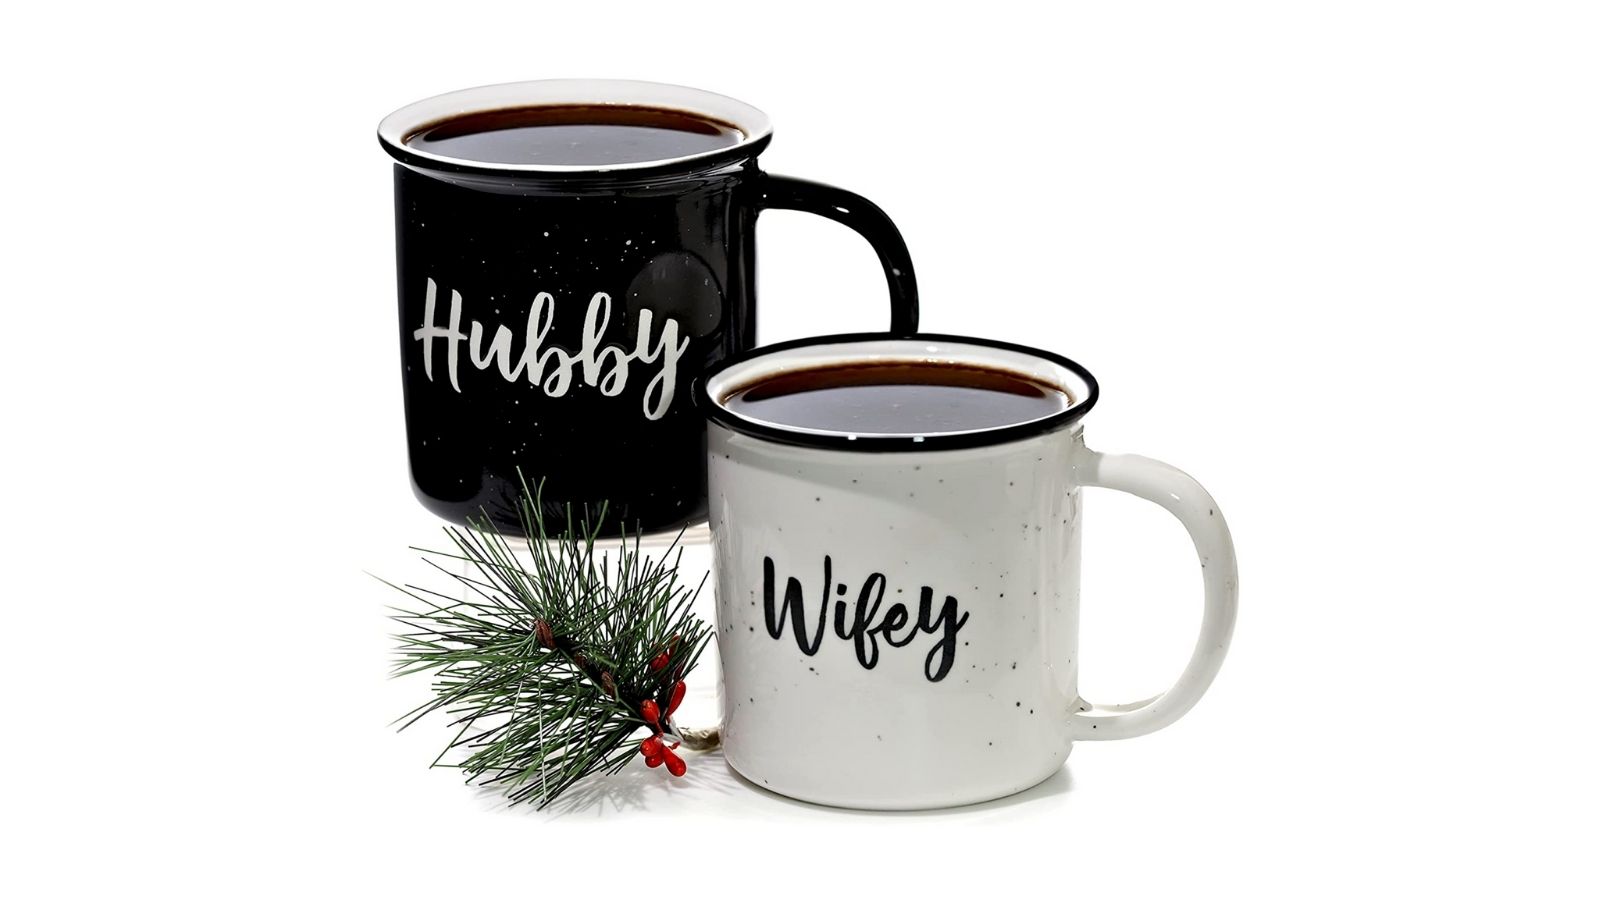 Fun coffee mugs gift ideas for the reomote worker